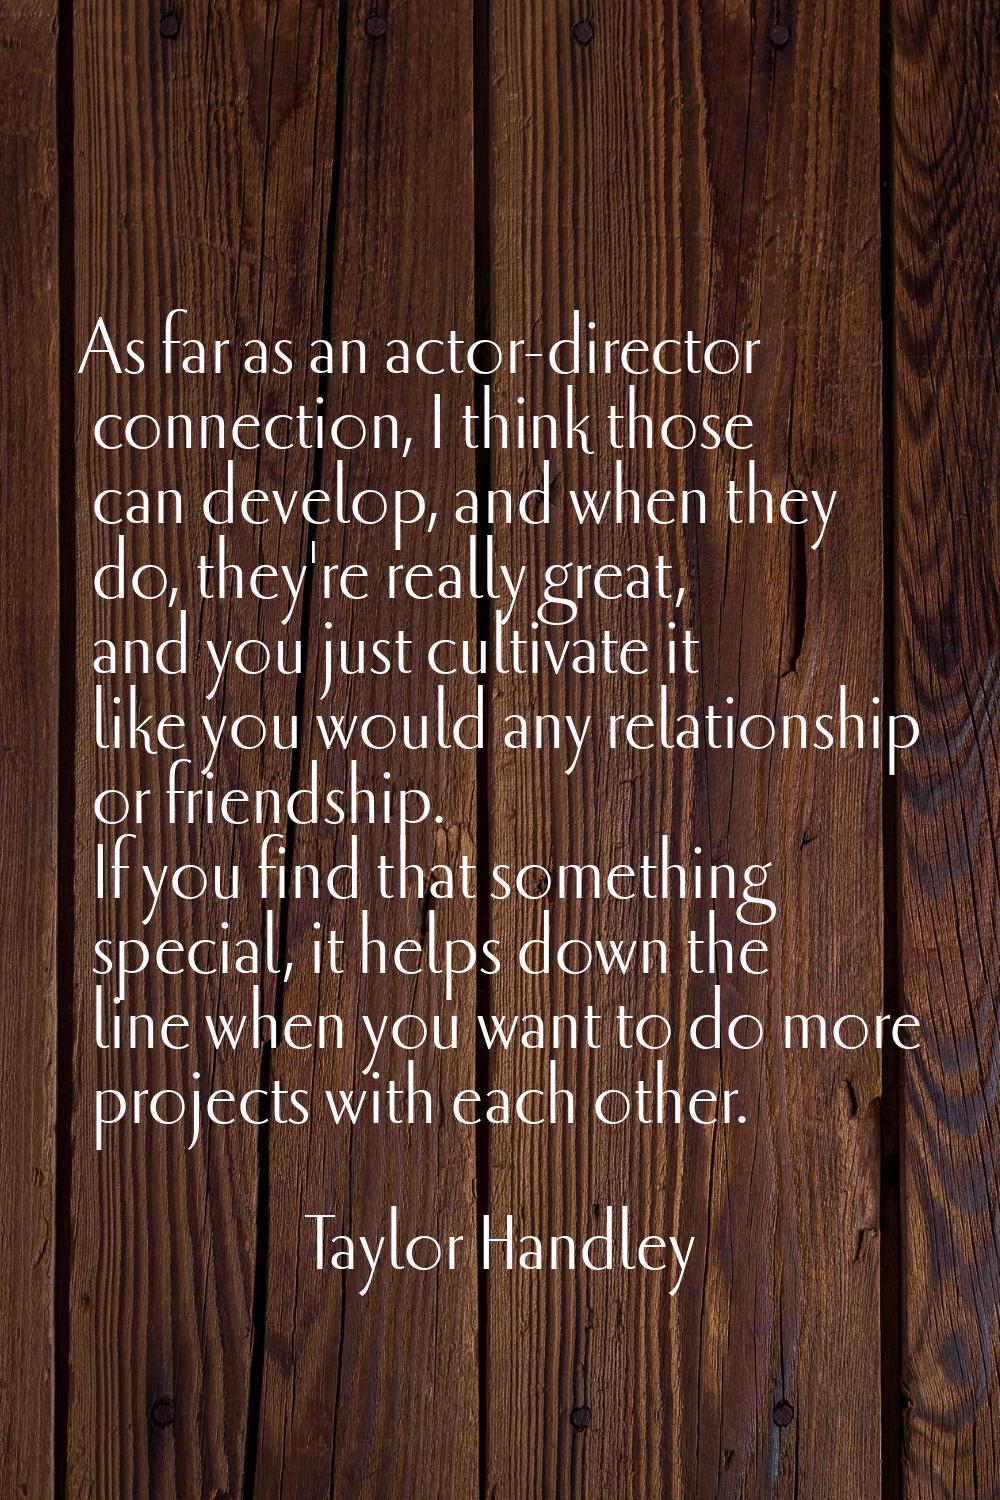 As far as an actor-director connection, I think those can develop, and when they do, they're really